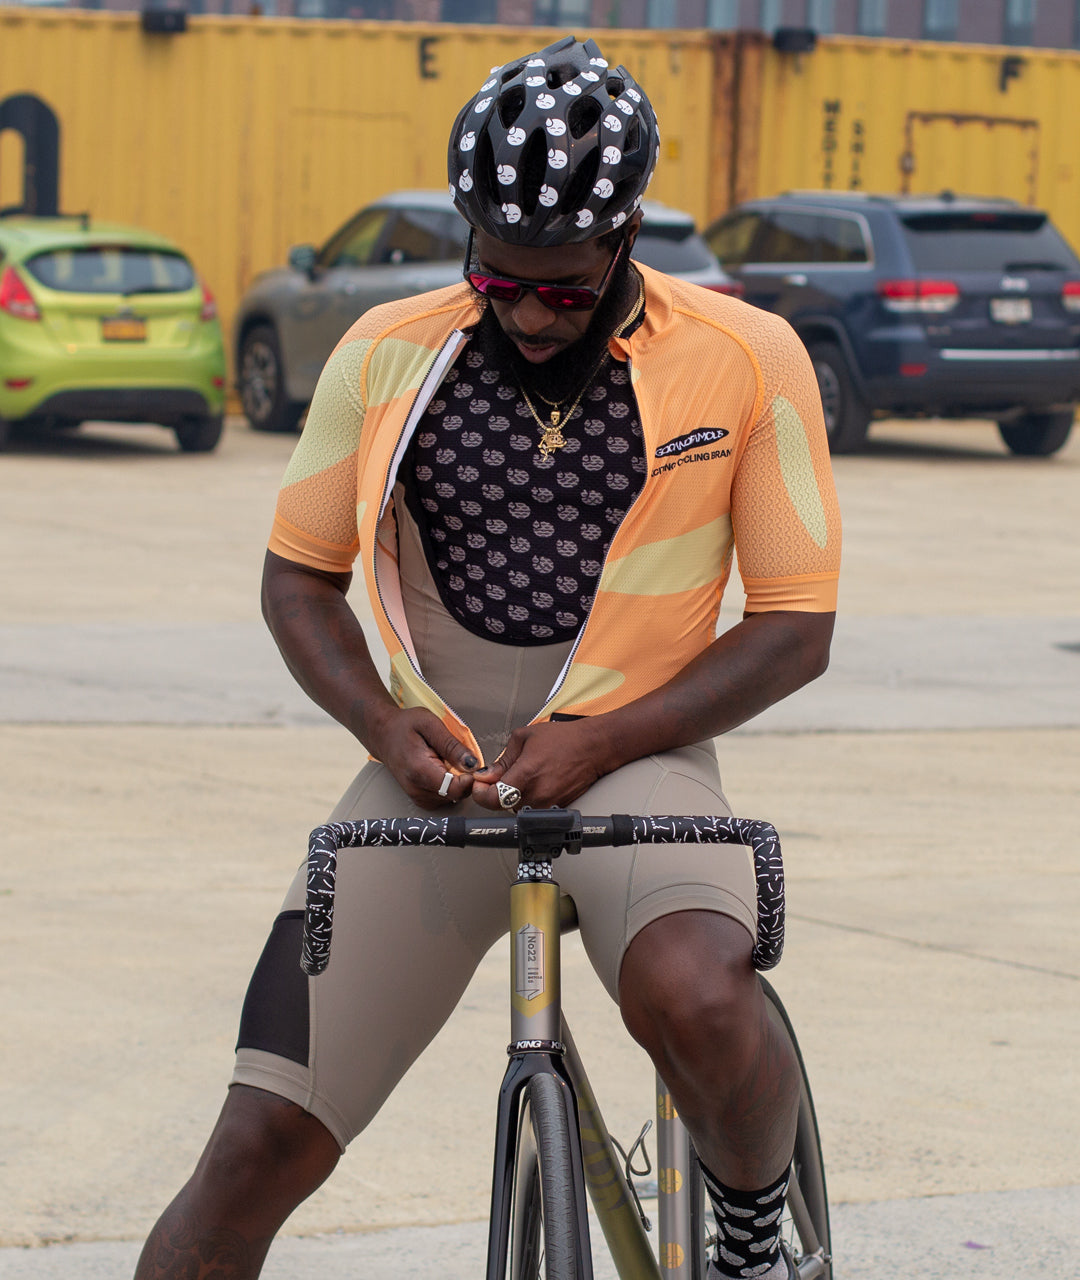 Sleeve | & | God Jersey Exciting Jersey Famous Cycling Short